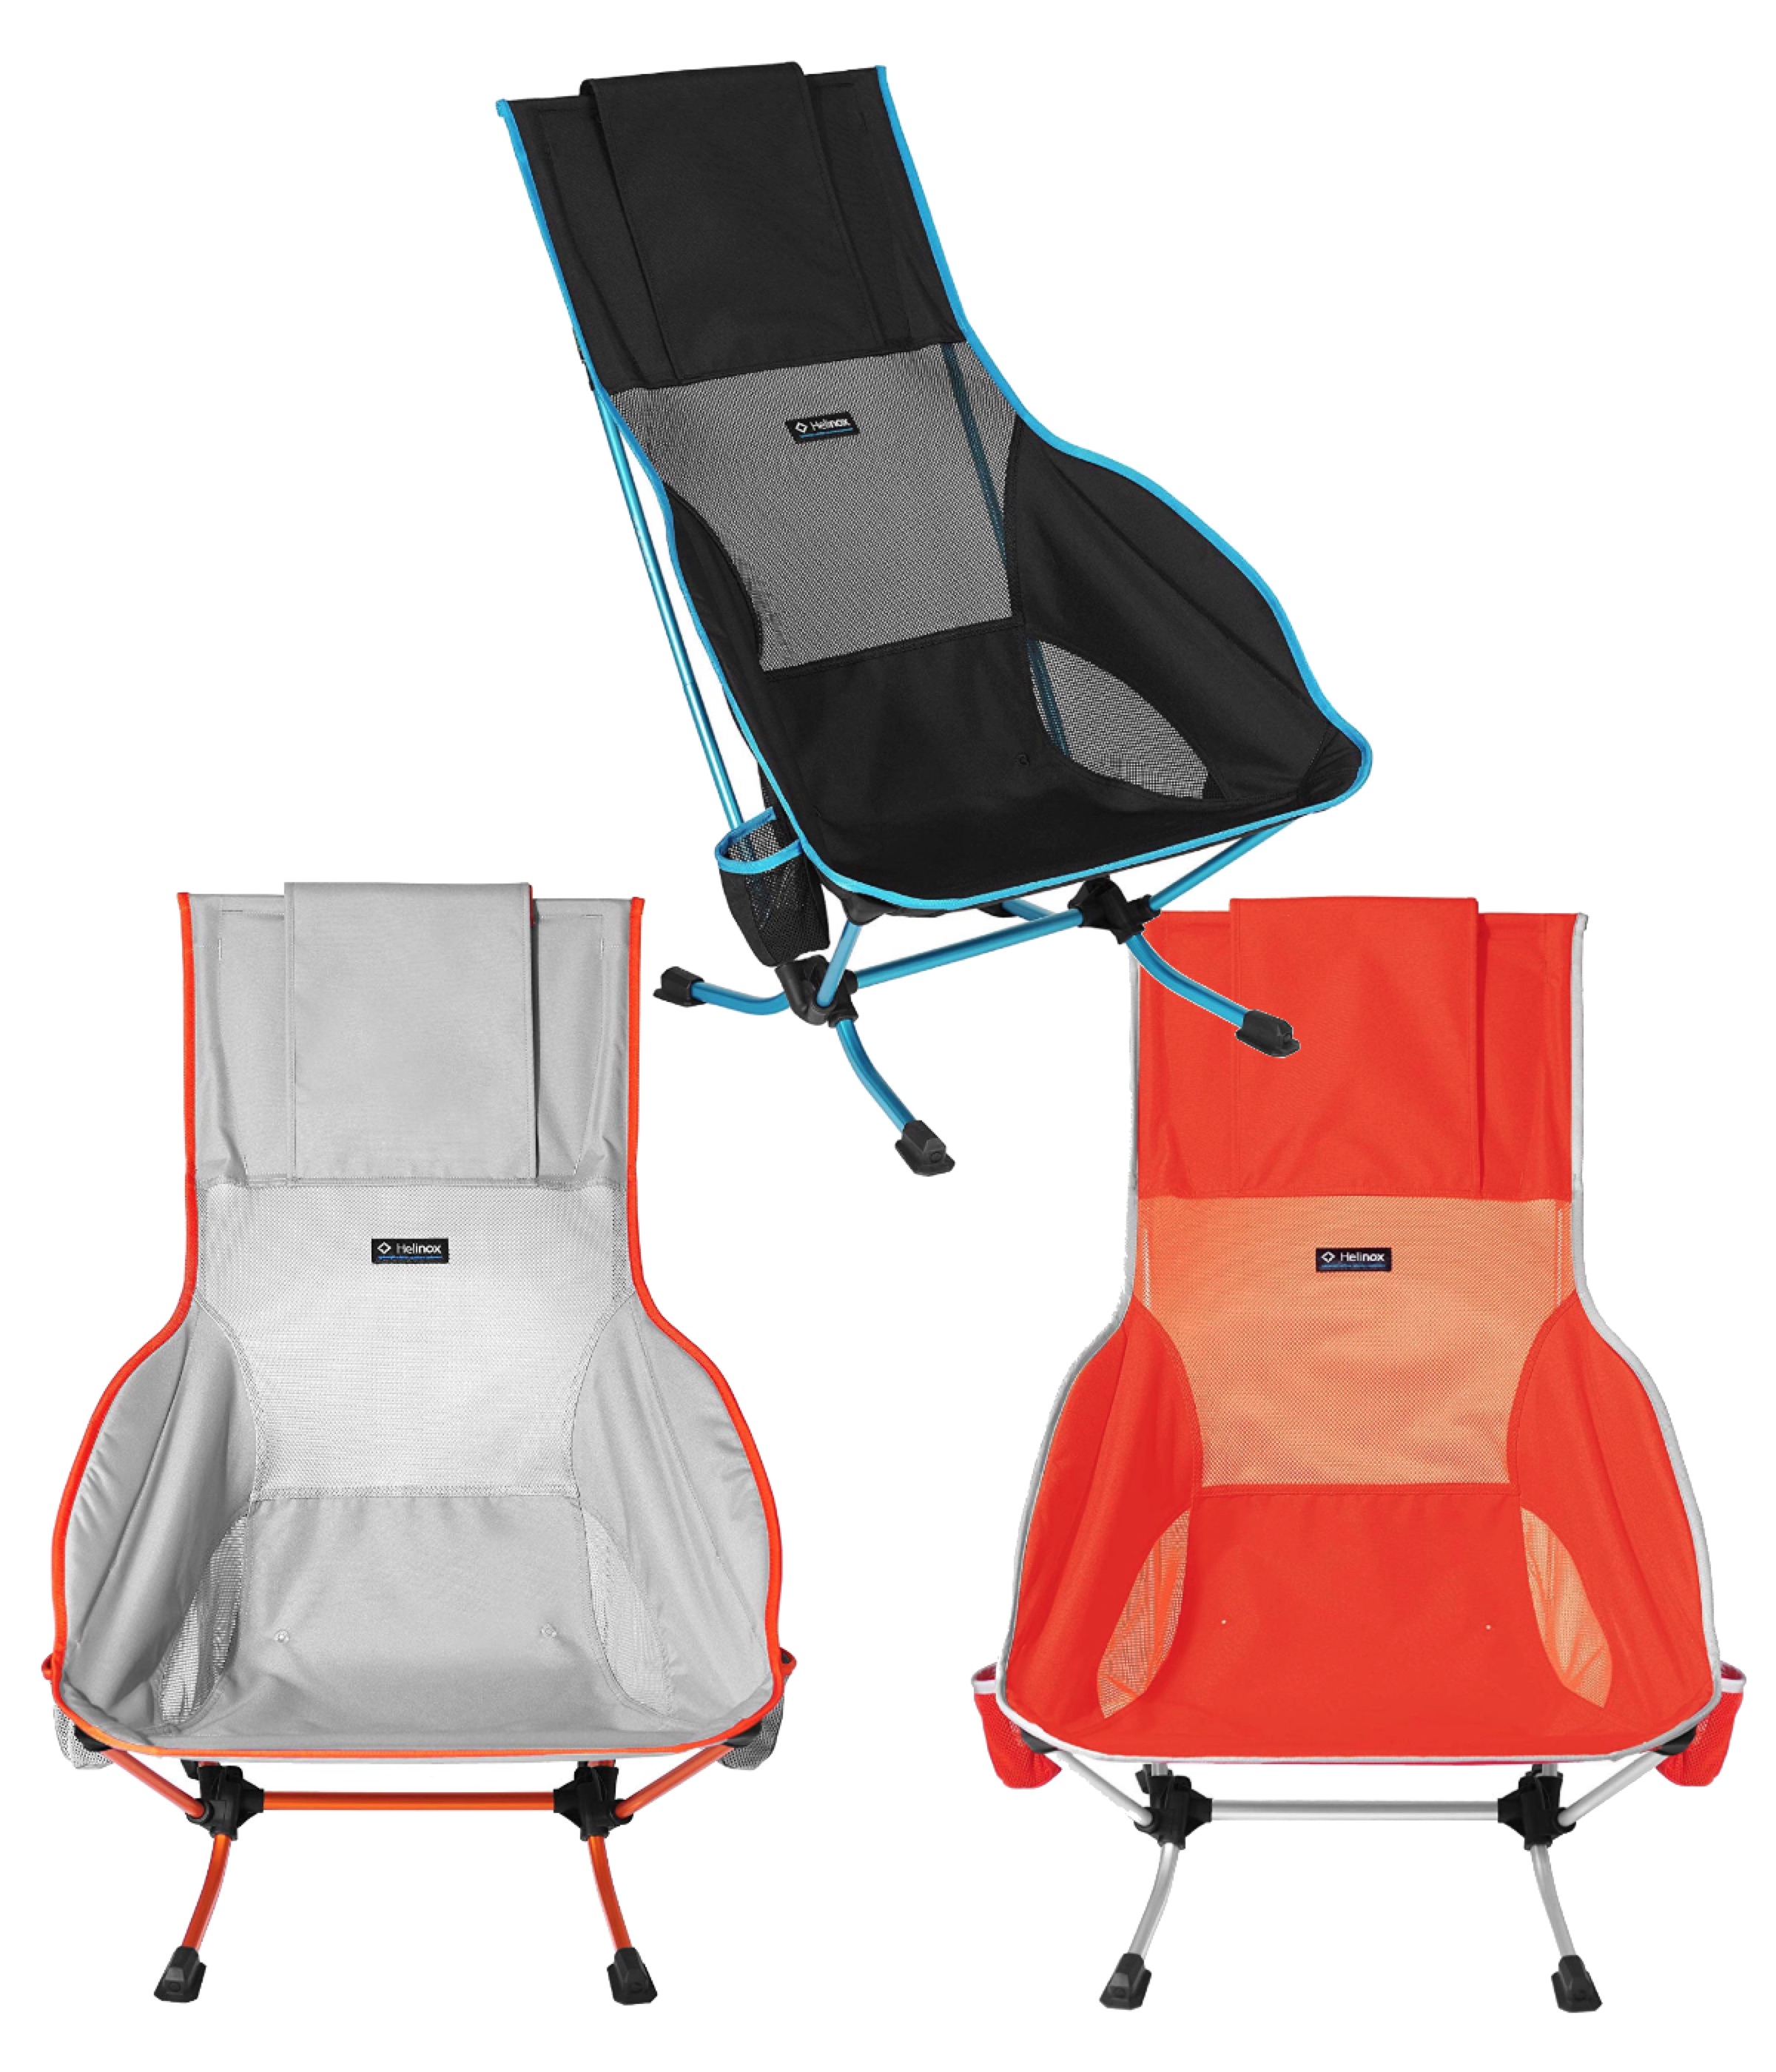 Creatice Lightweight Comfortable Beach Chair for Large Space